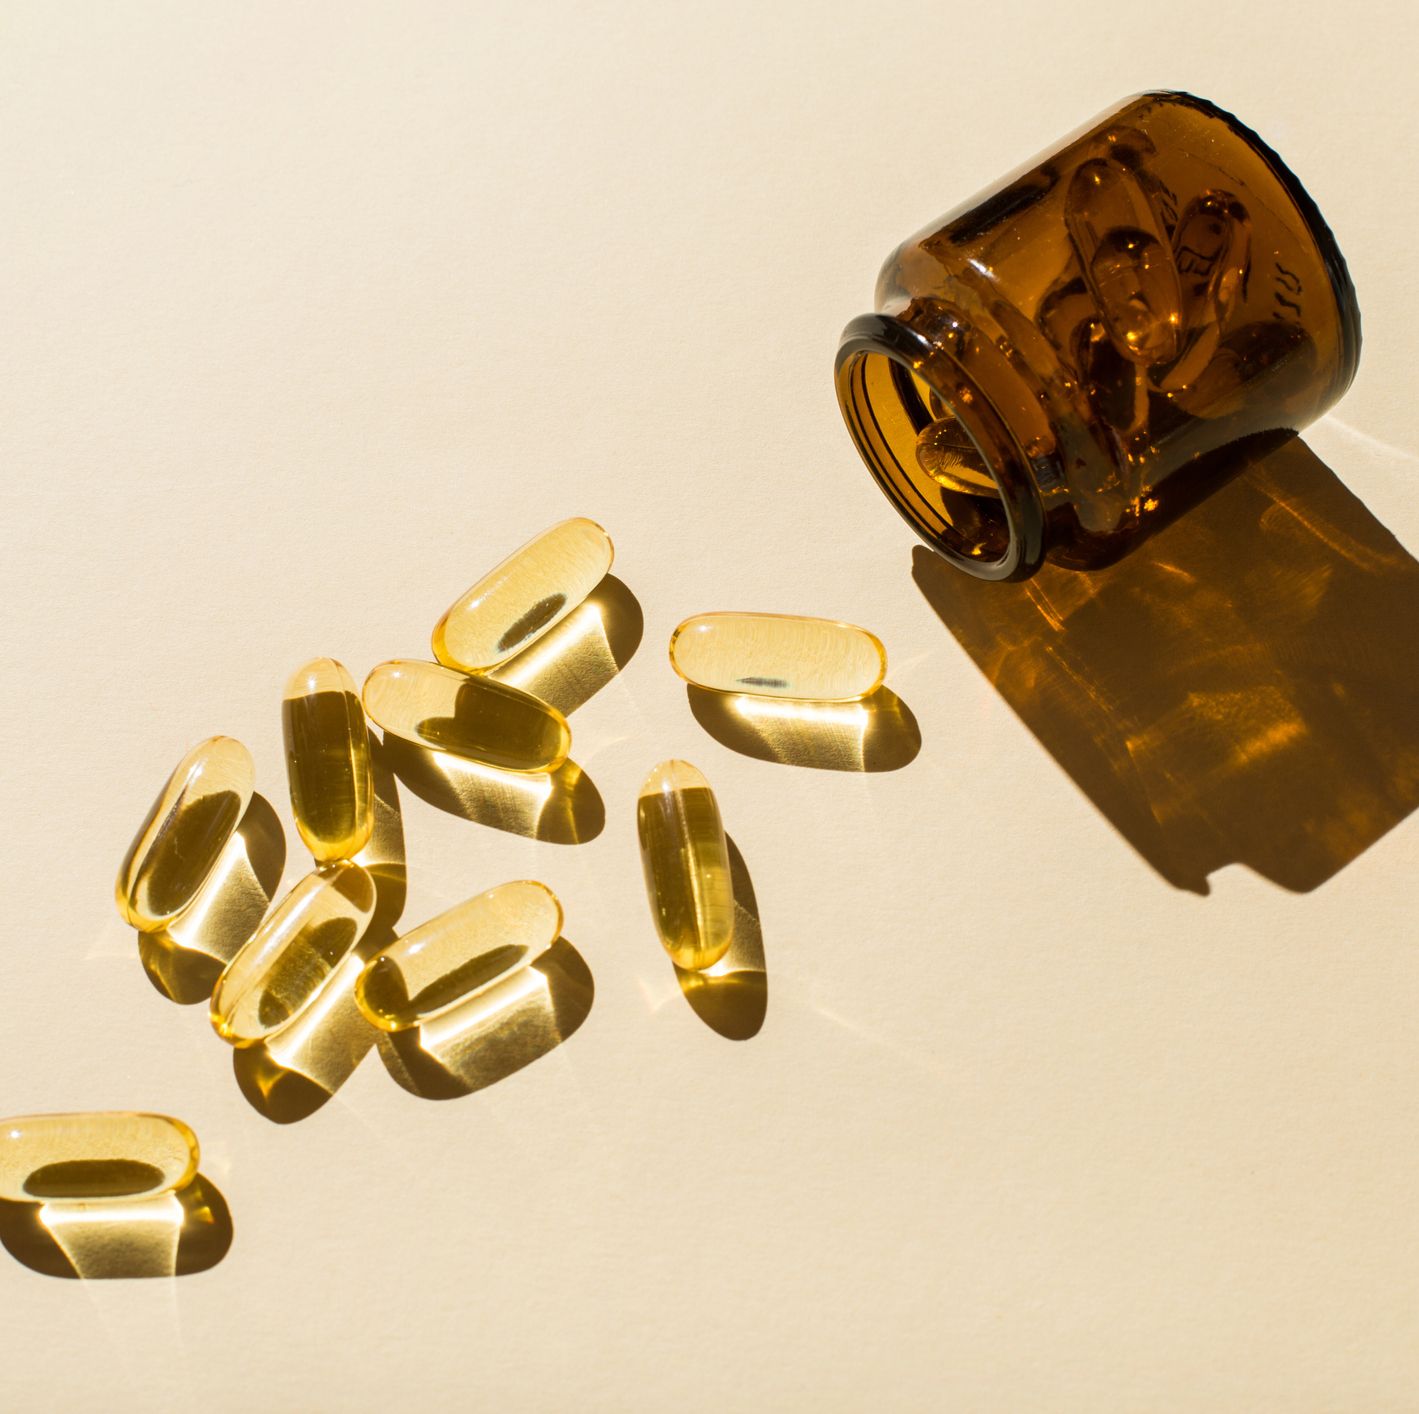 Dietitians Explain the Truth About Taking Fish Oil